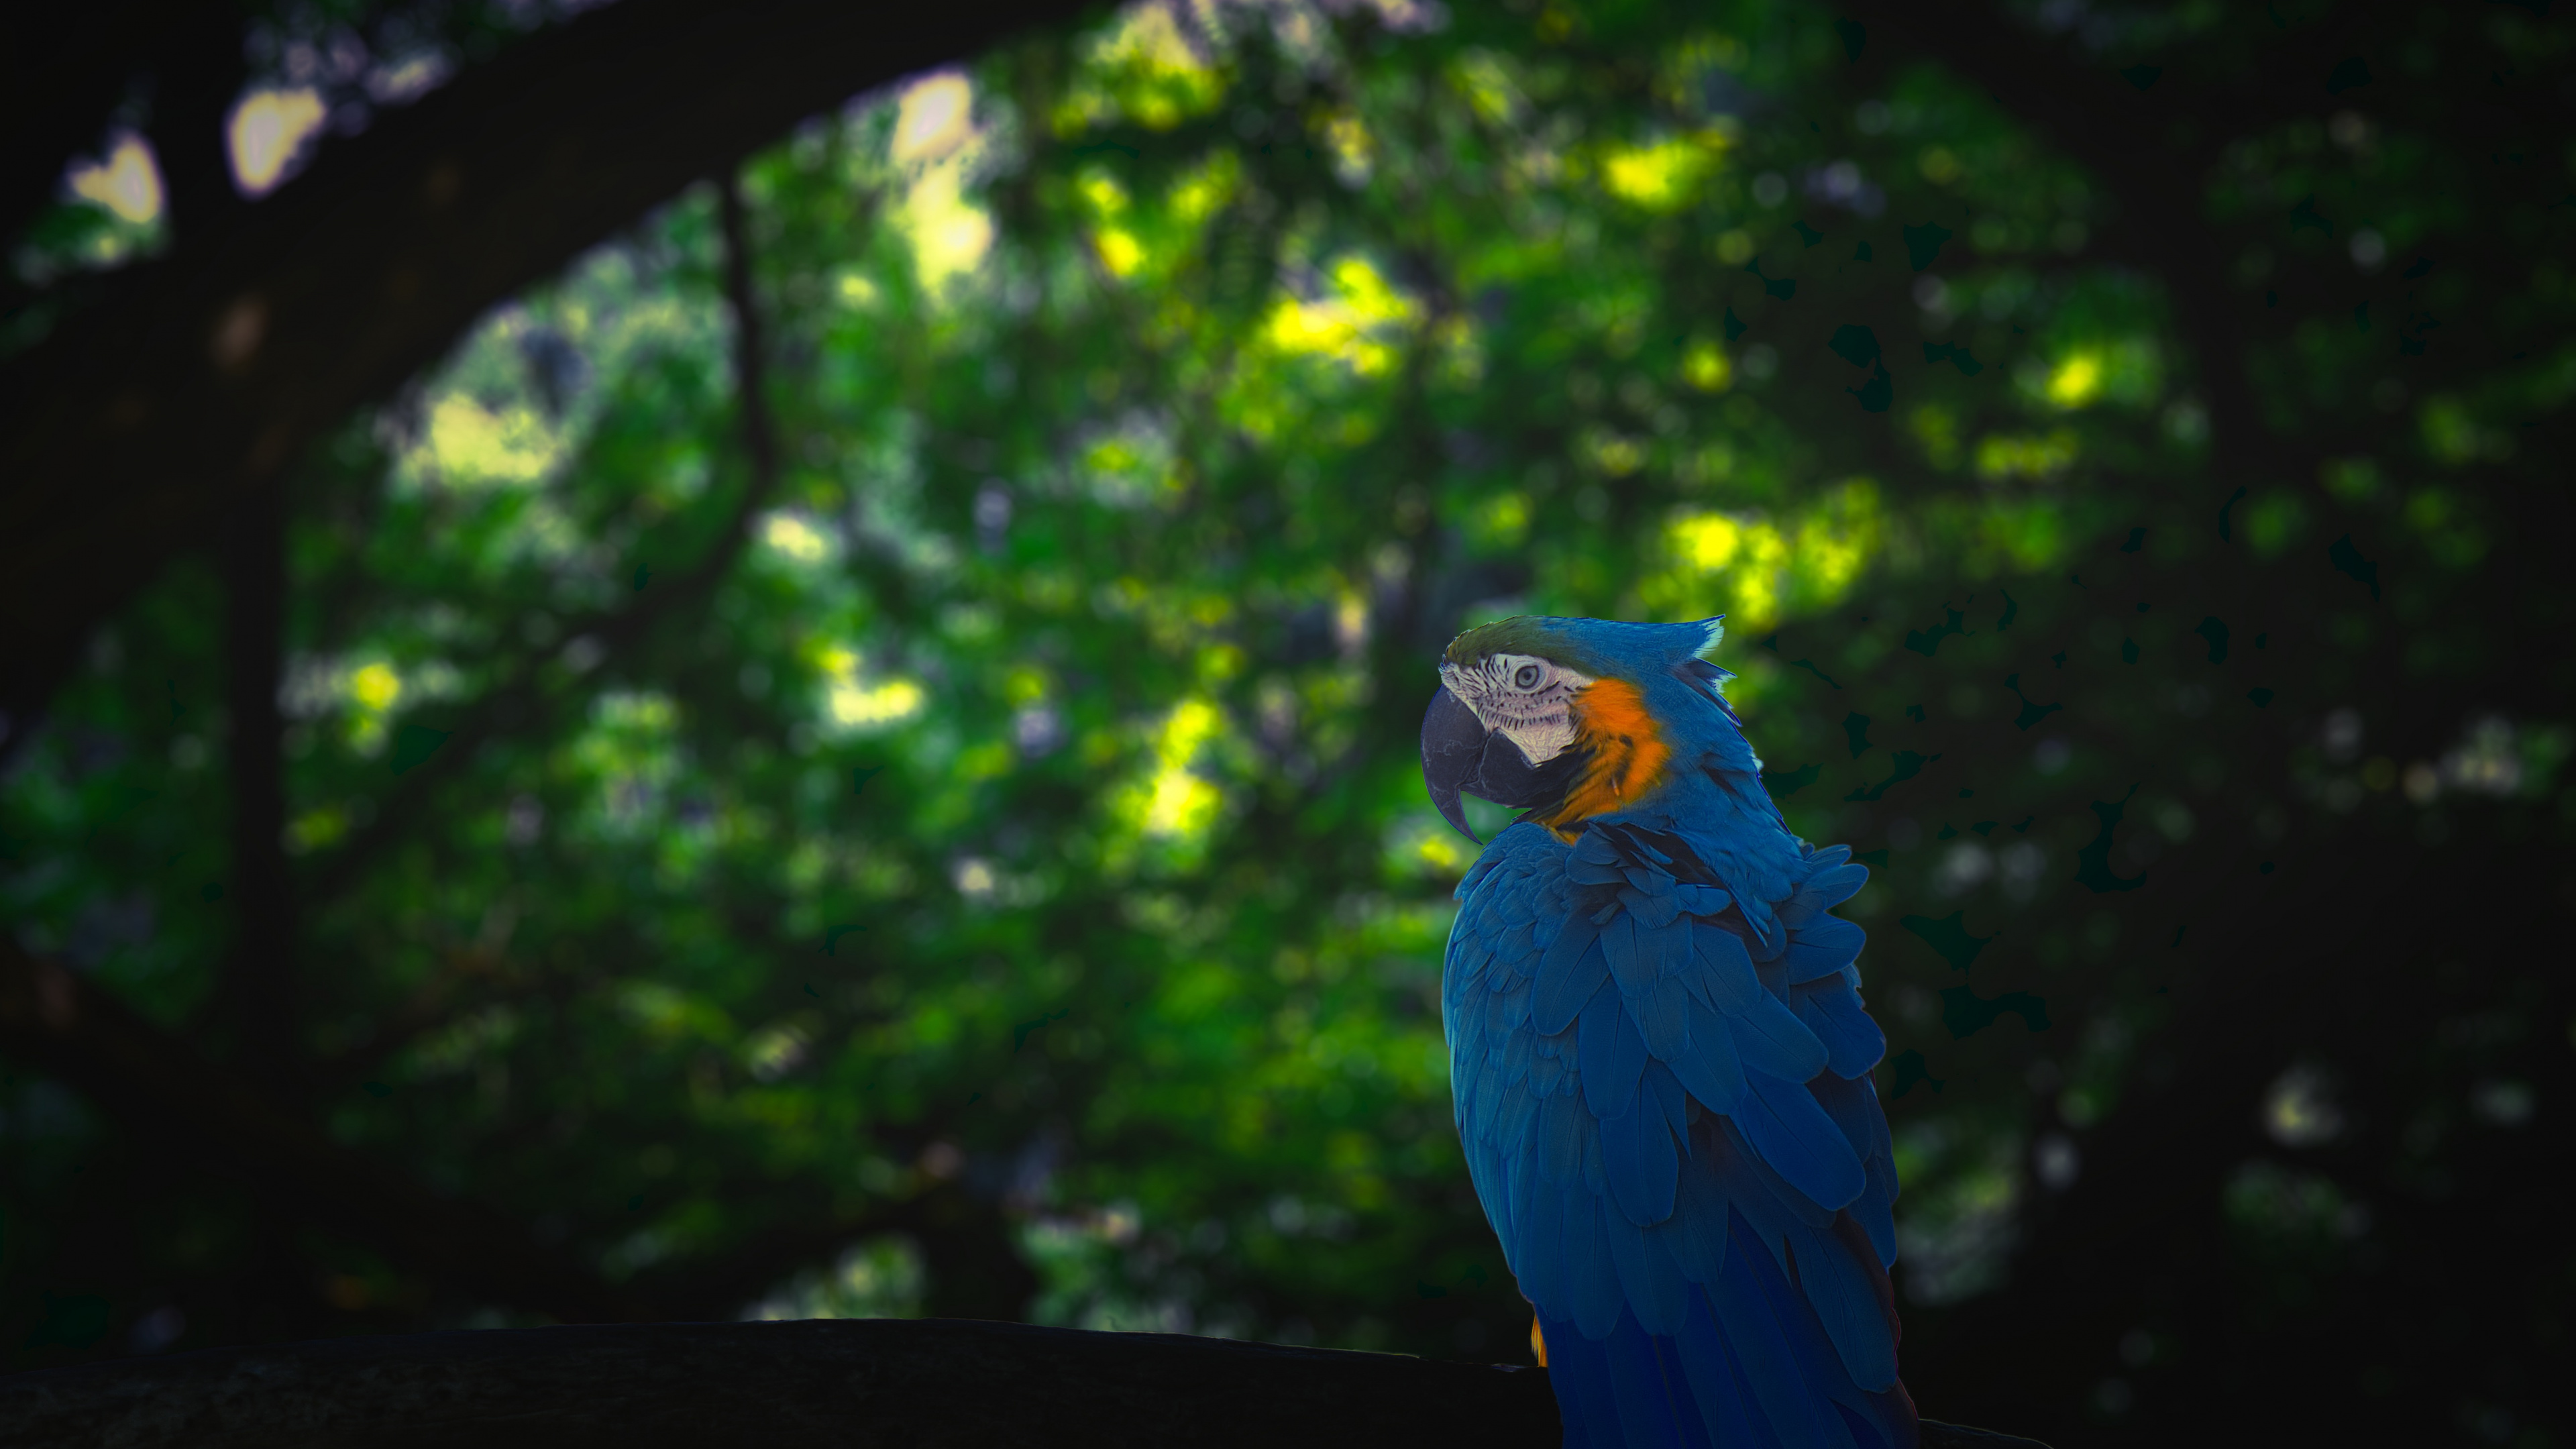 Blue and Yellow Macaw on Black Wooden Fence During Daytime. Wallpaper in 3840x2160 Resolution